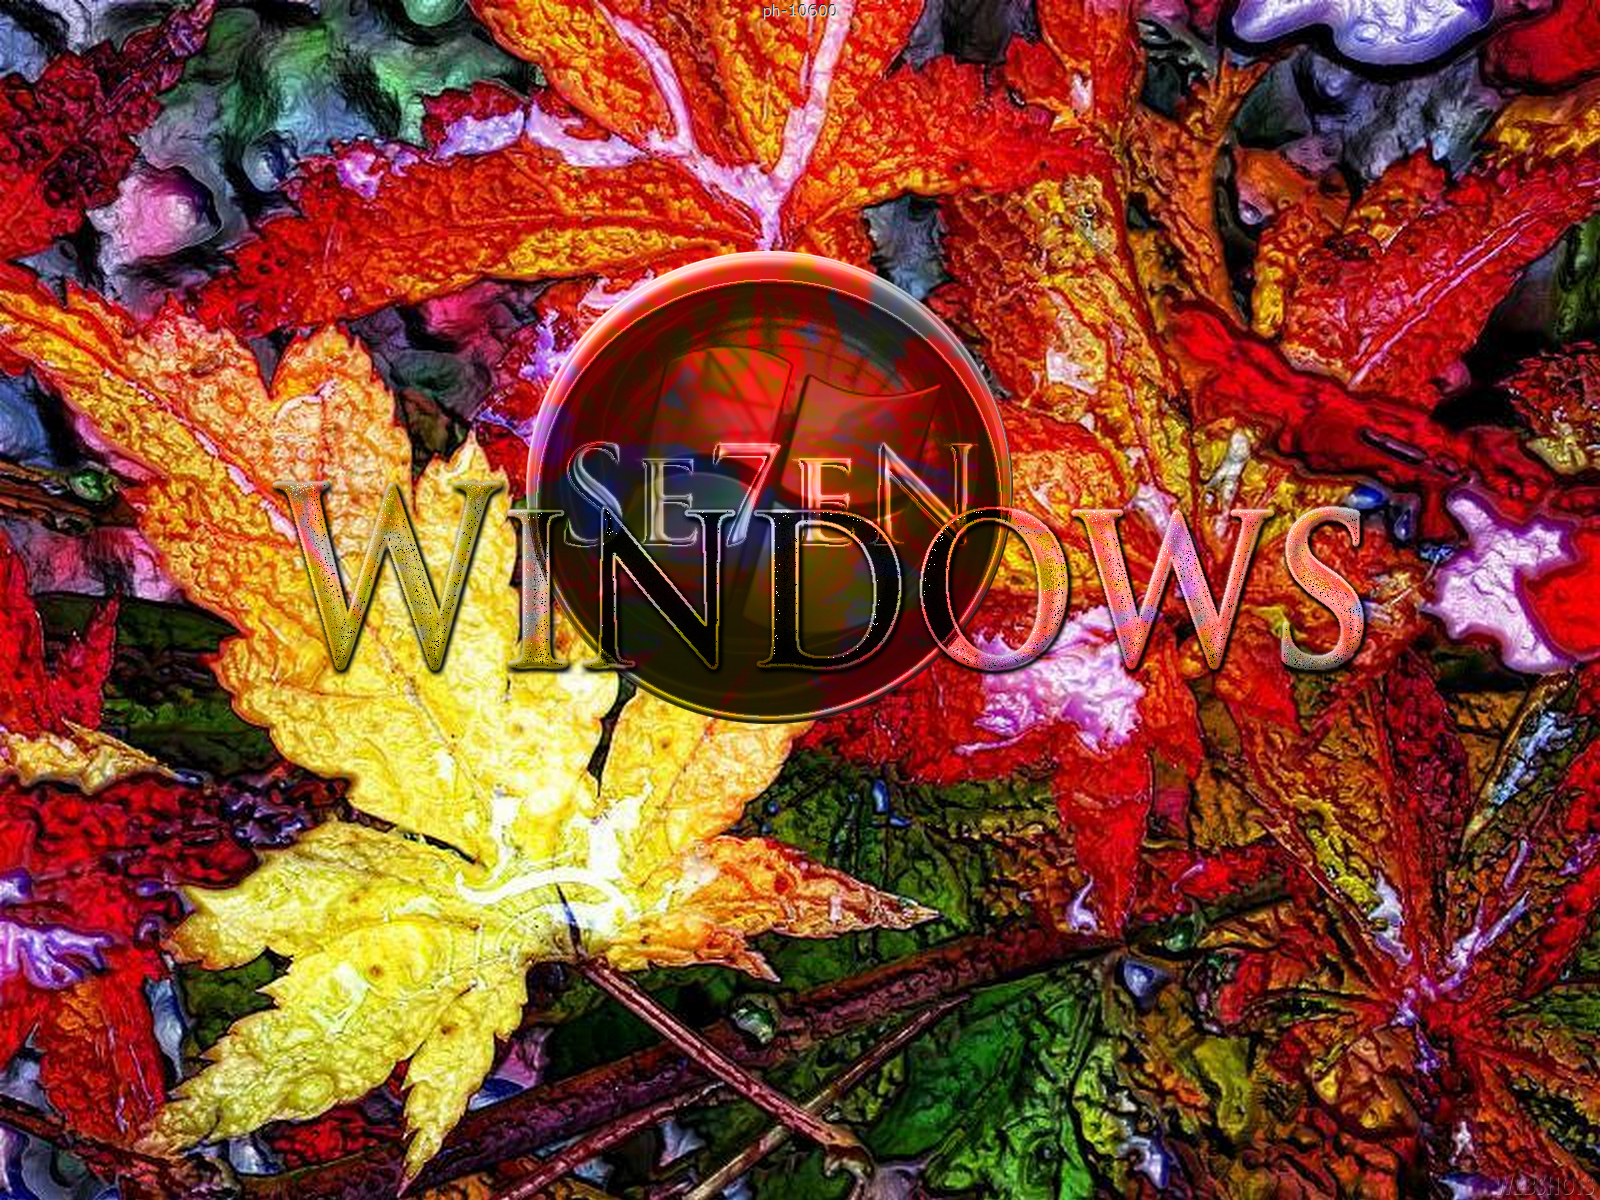 New games free: Windows8 all new wallpaper free downloads